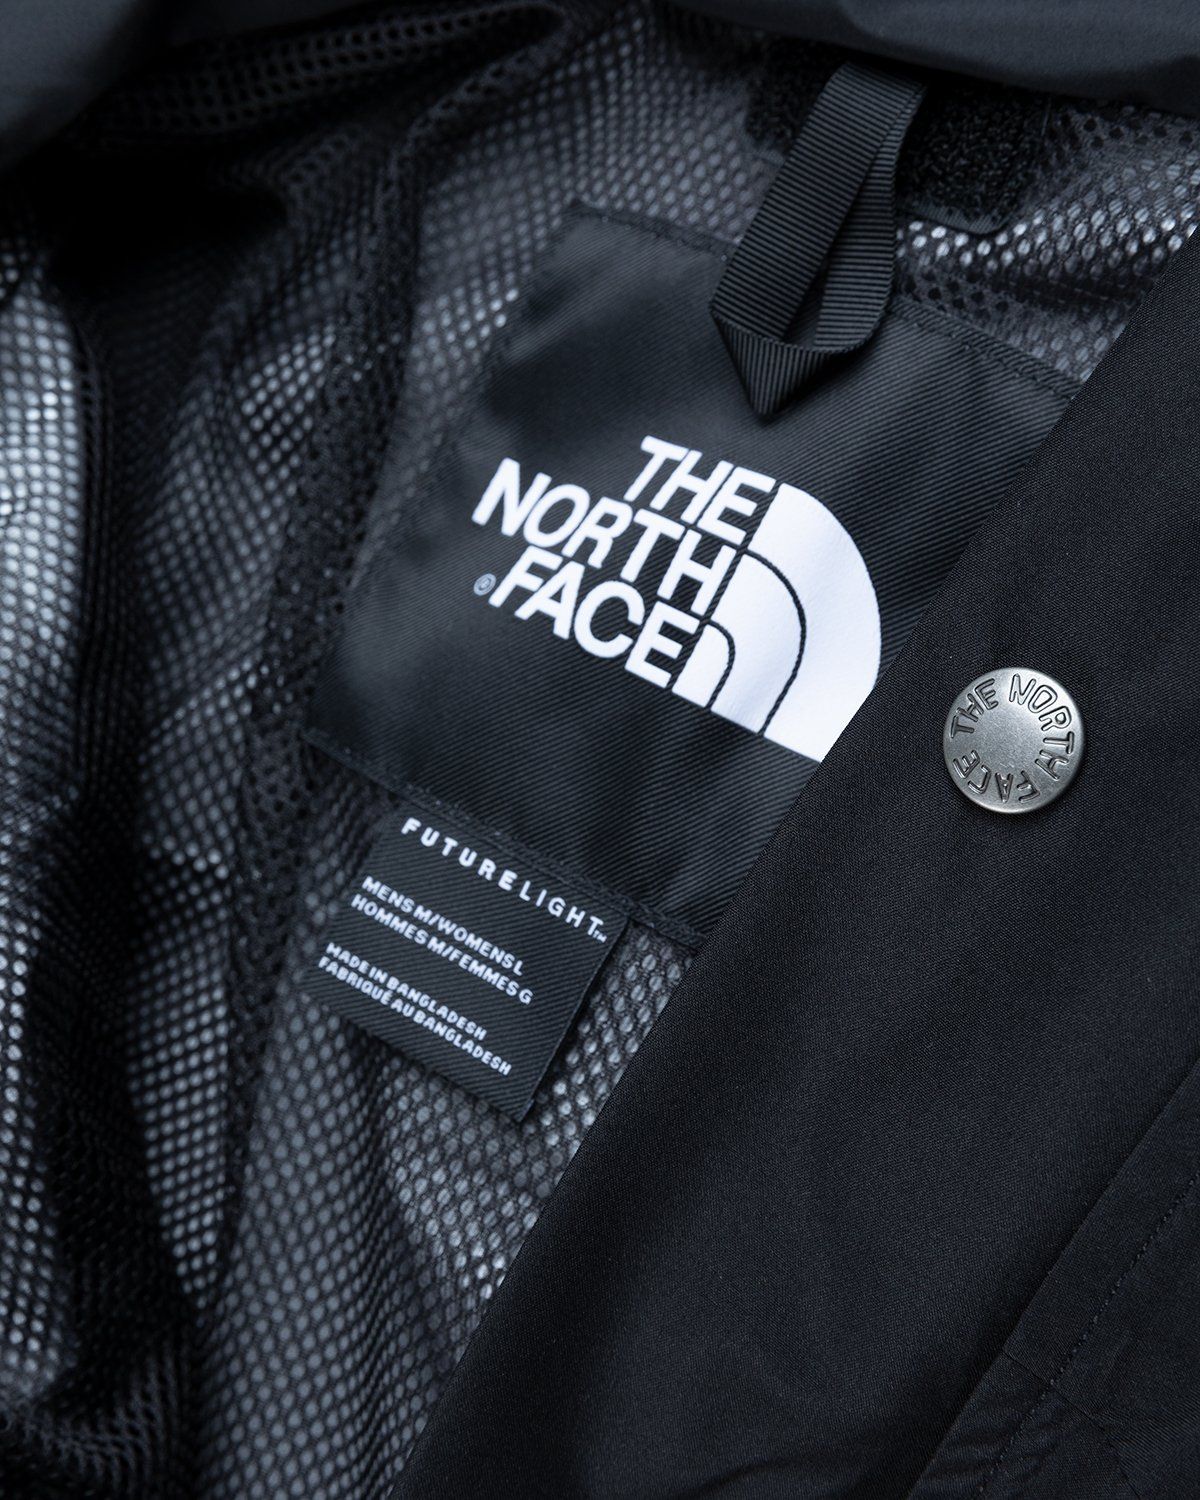 The North Face – 1994 Retro Mountain Light Jacket Black - Outerwear - Black - Image 4